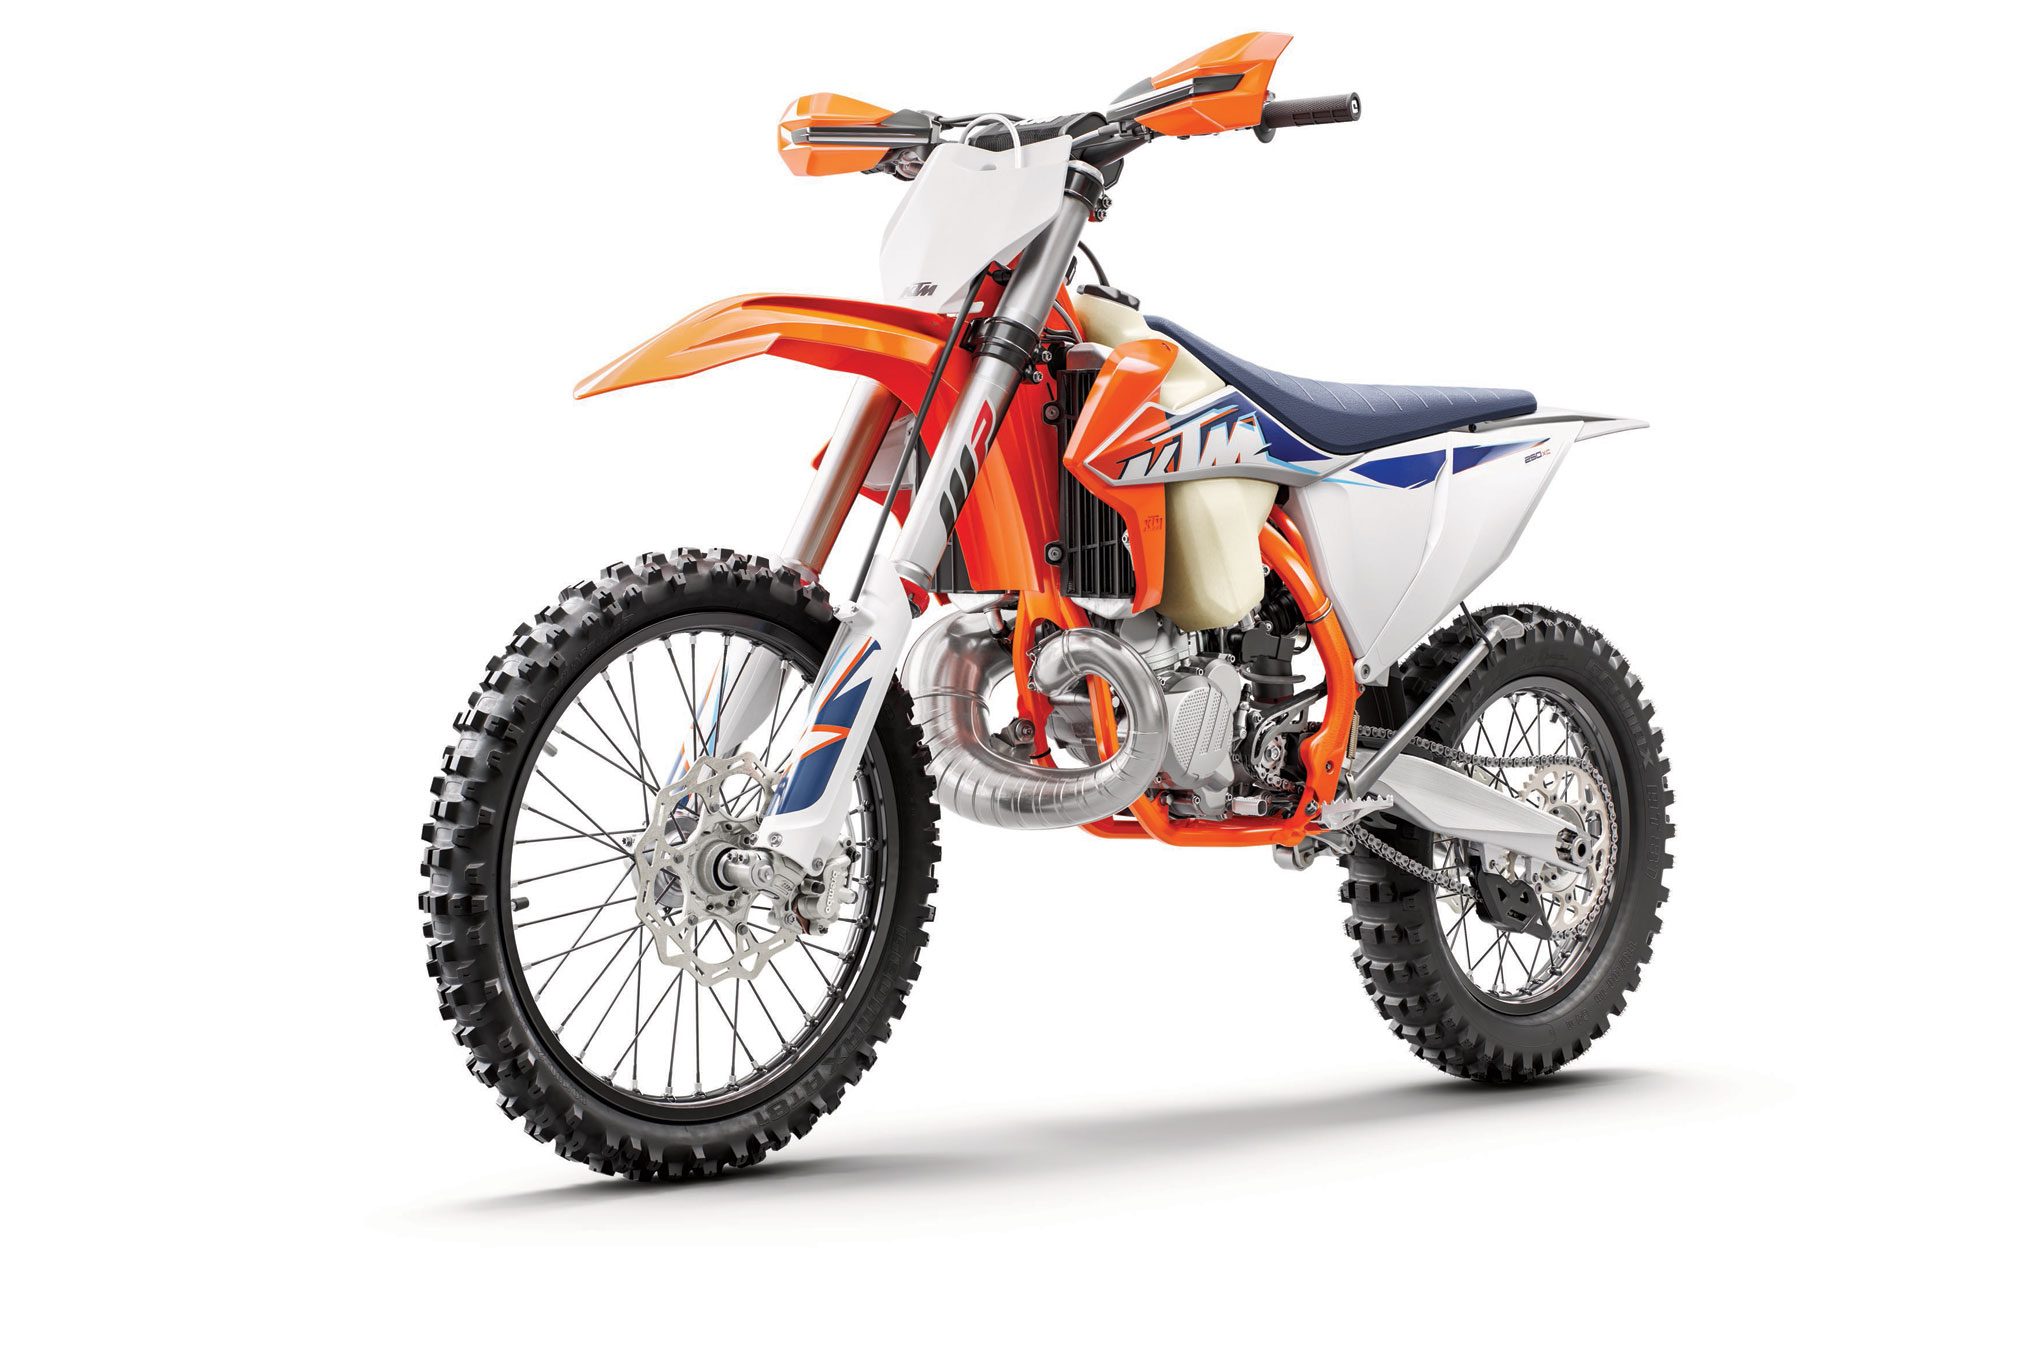 2022 KTM 250 XC TPI Guide • Total Motorcycle